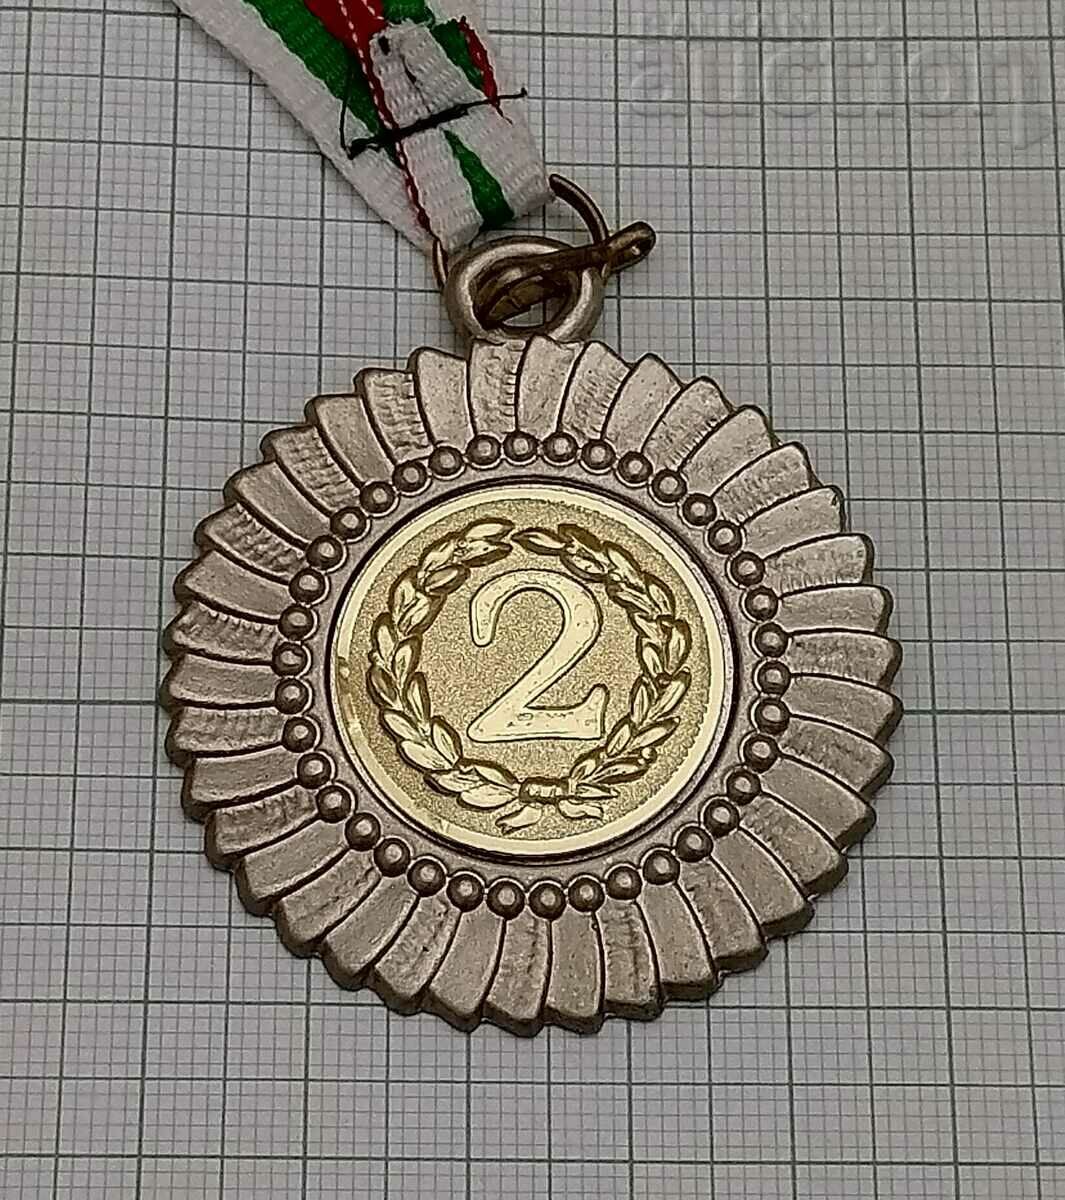 SECOND PLACE MEDAL